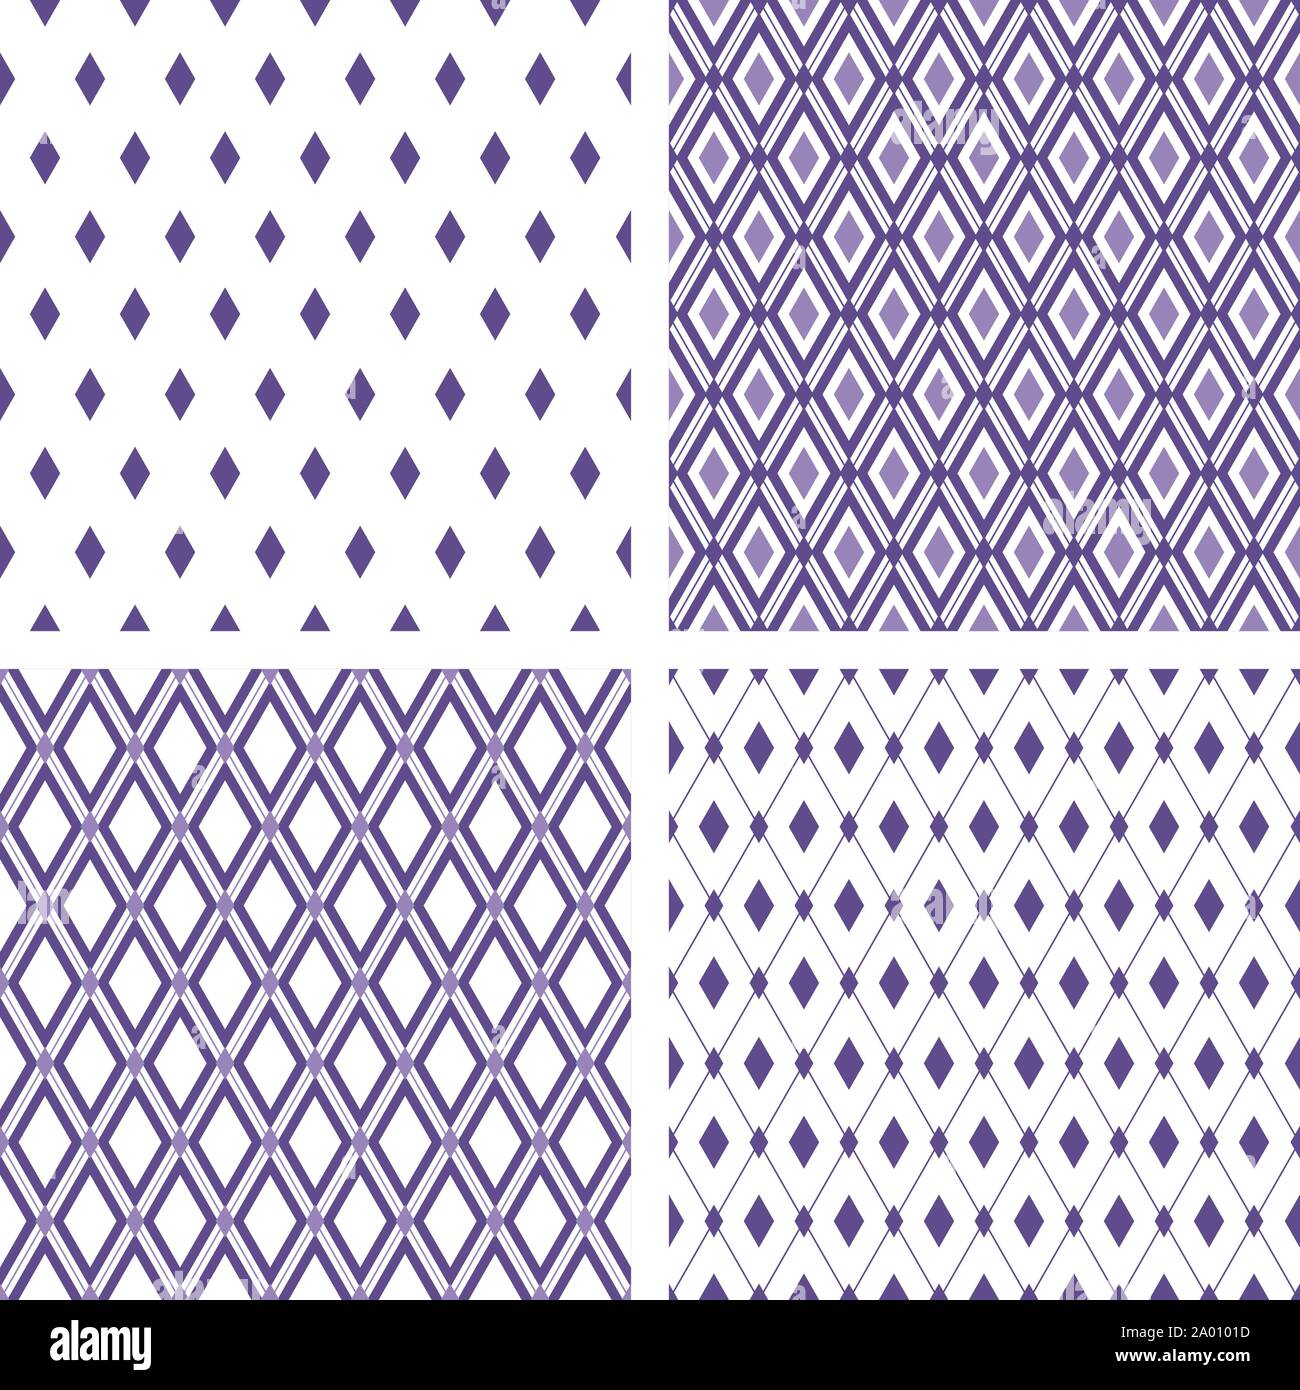 Set of seamless rhombus ultra violet backgrounds Stock Vector